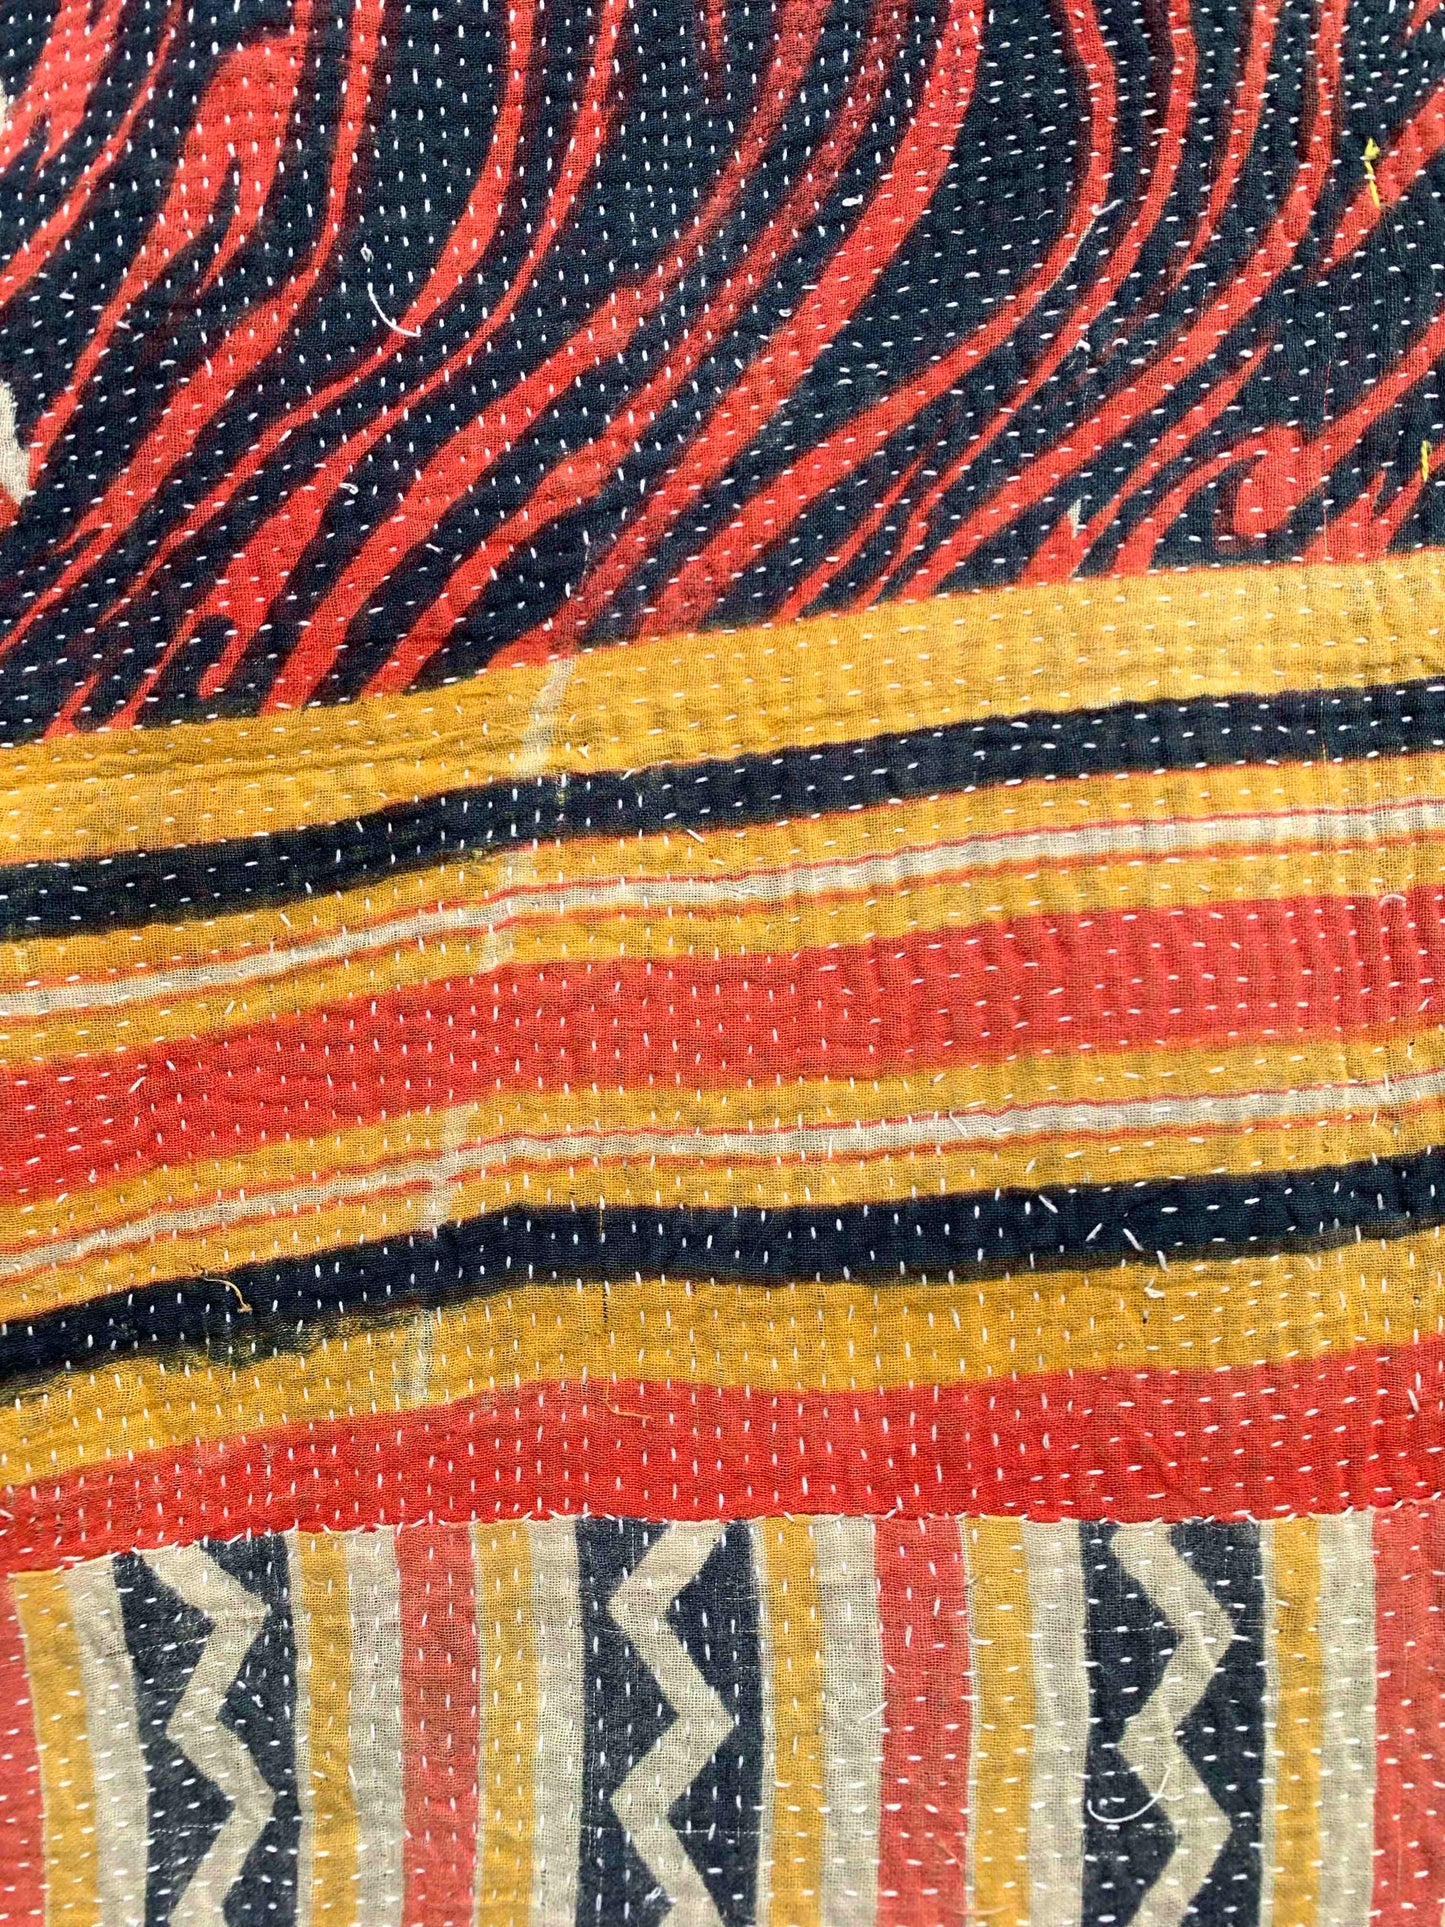 Red, black and yellow kantha